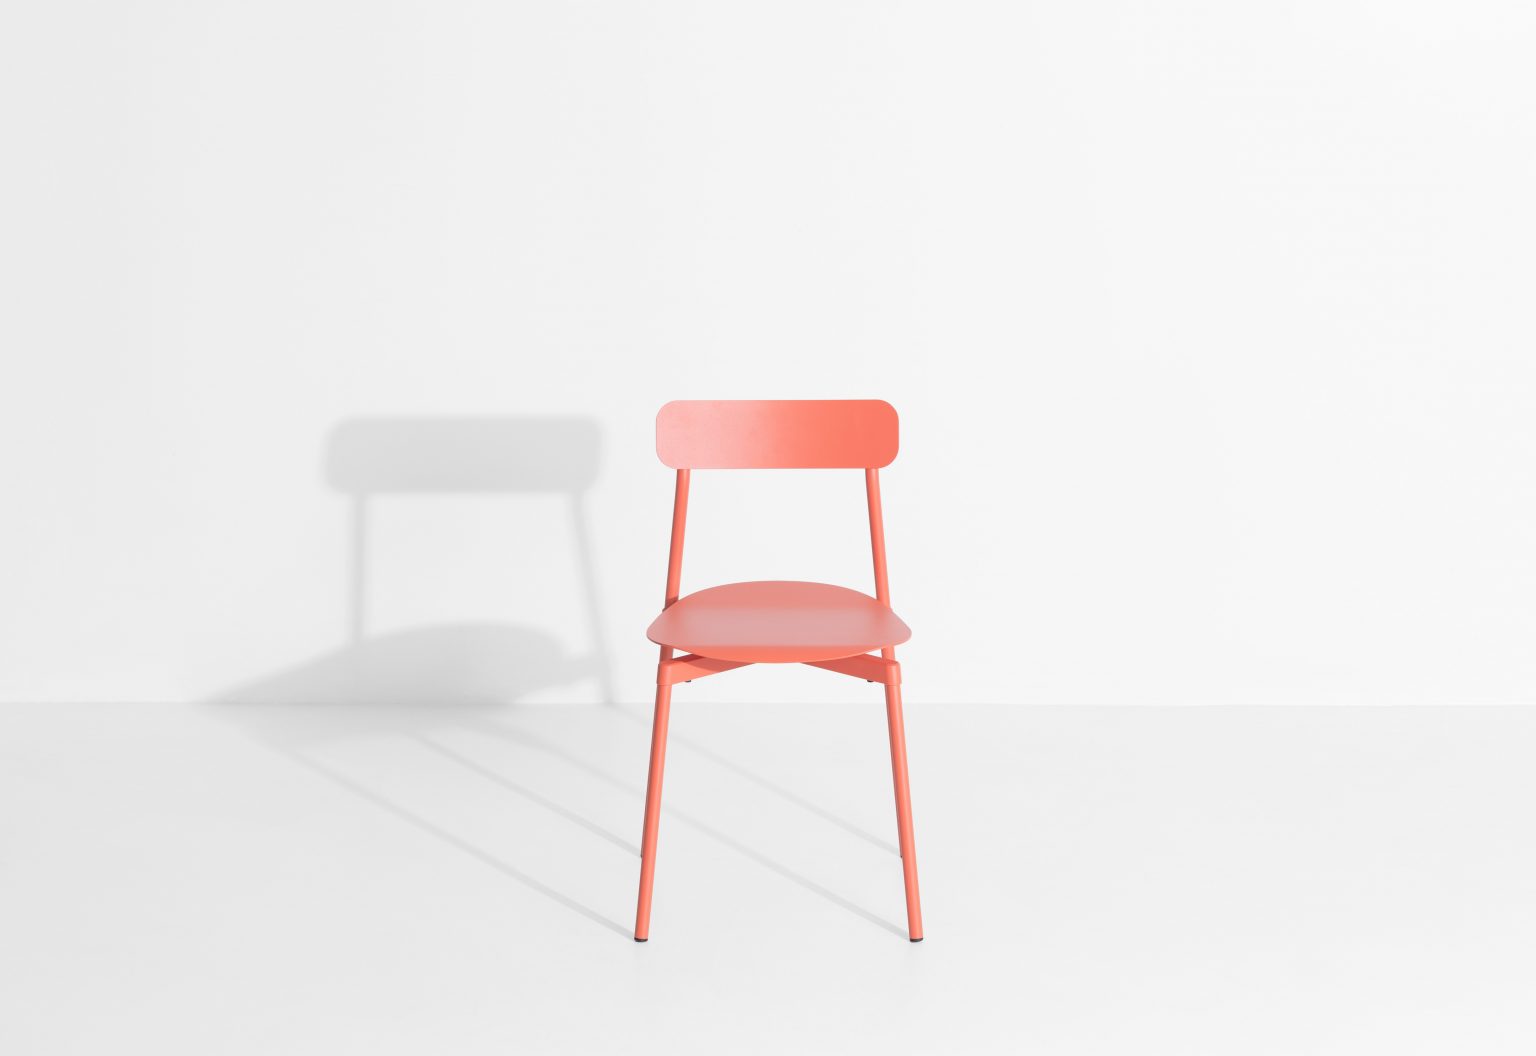 Biennale Interieur - Belgium's leading design and interior event - M0810105_fromme_chair_coral_©pf_packshot_hd-5.jpg